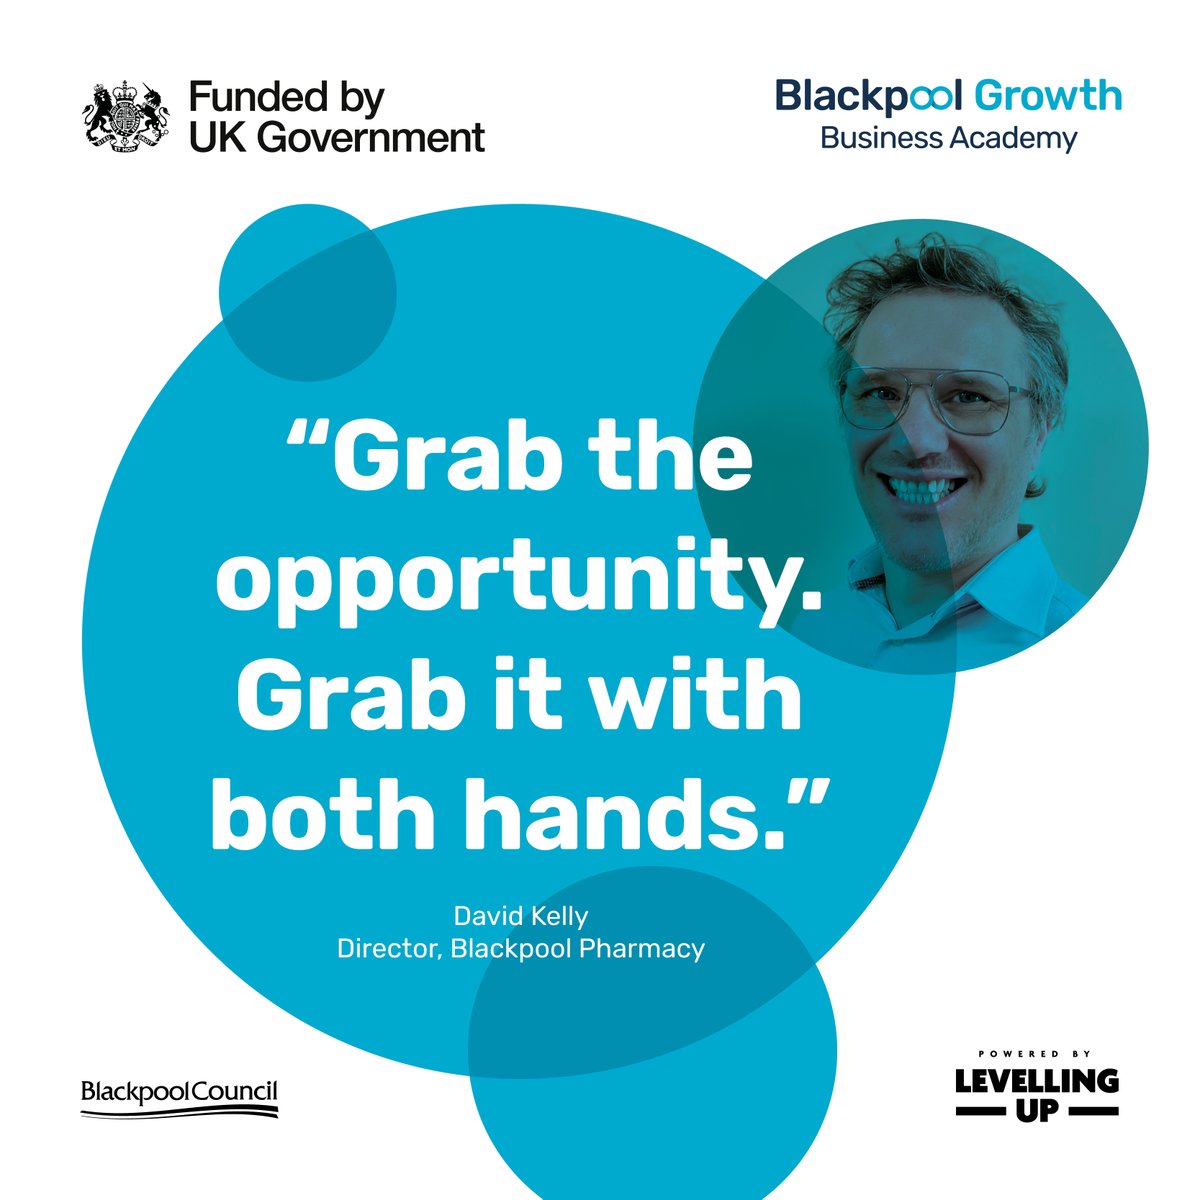 In our latest blog Blackpool Pharmacy’s Director, David Kelly discusses how his approach to community pharmacy services has become a £1 million+ business & how fully funded support from Blackpool Growth Business Academy is helping the business blackpoolunlimited.com/bbga-case-stud… #UKSPF